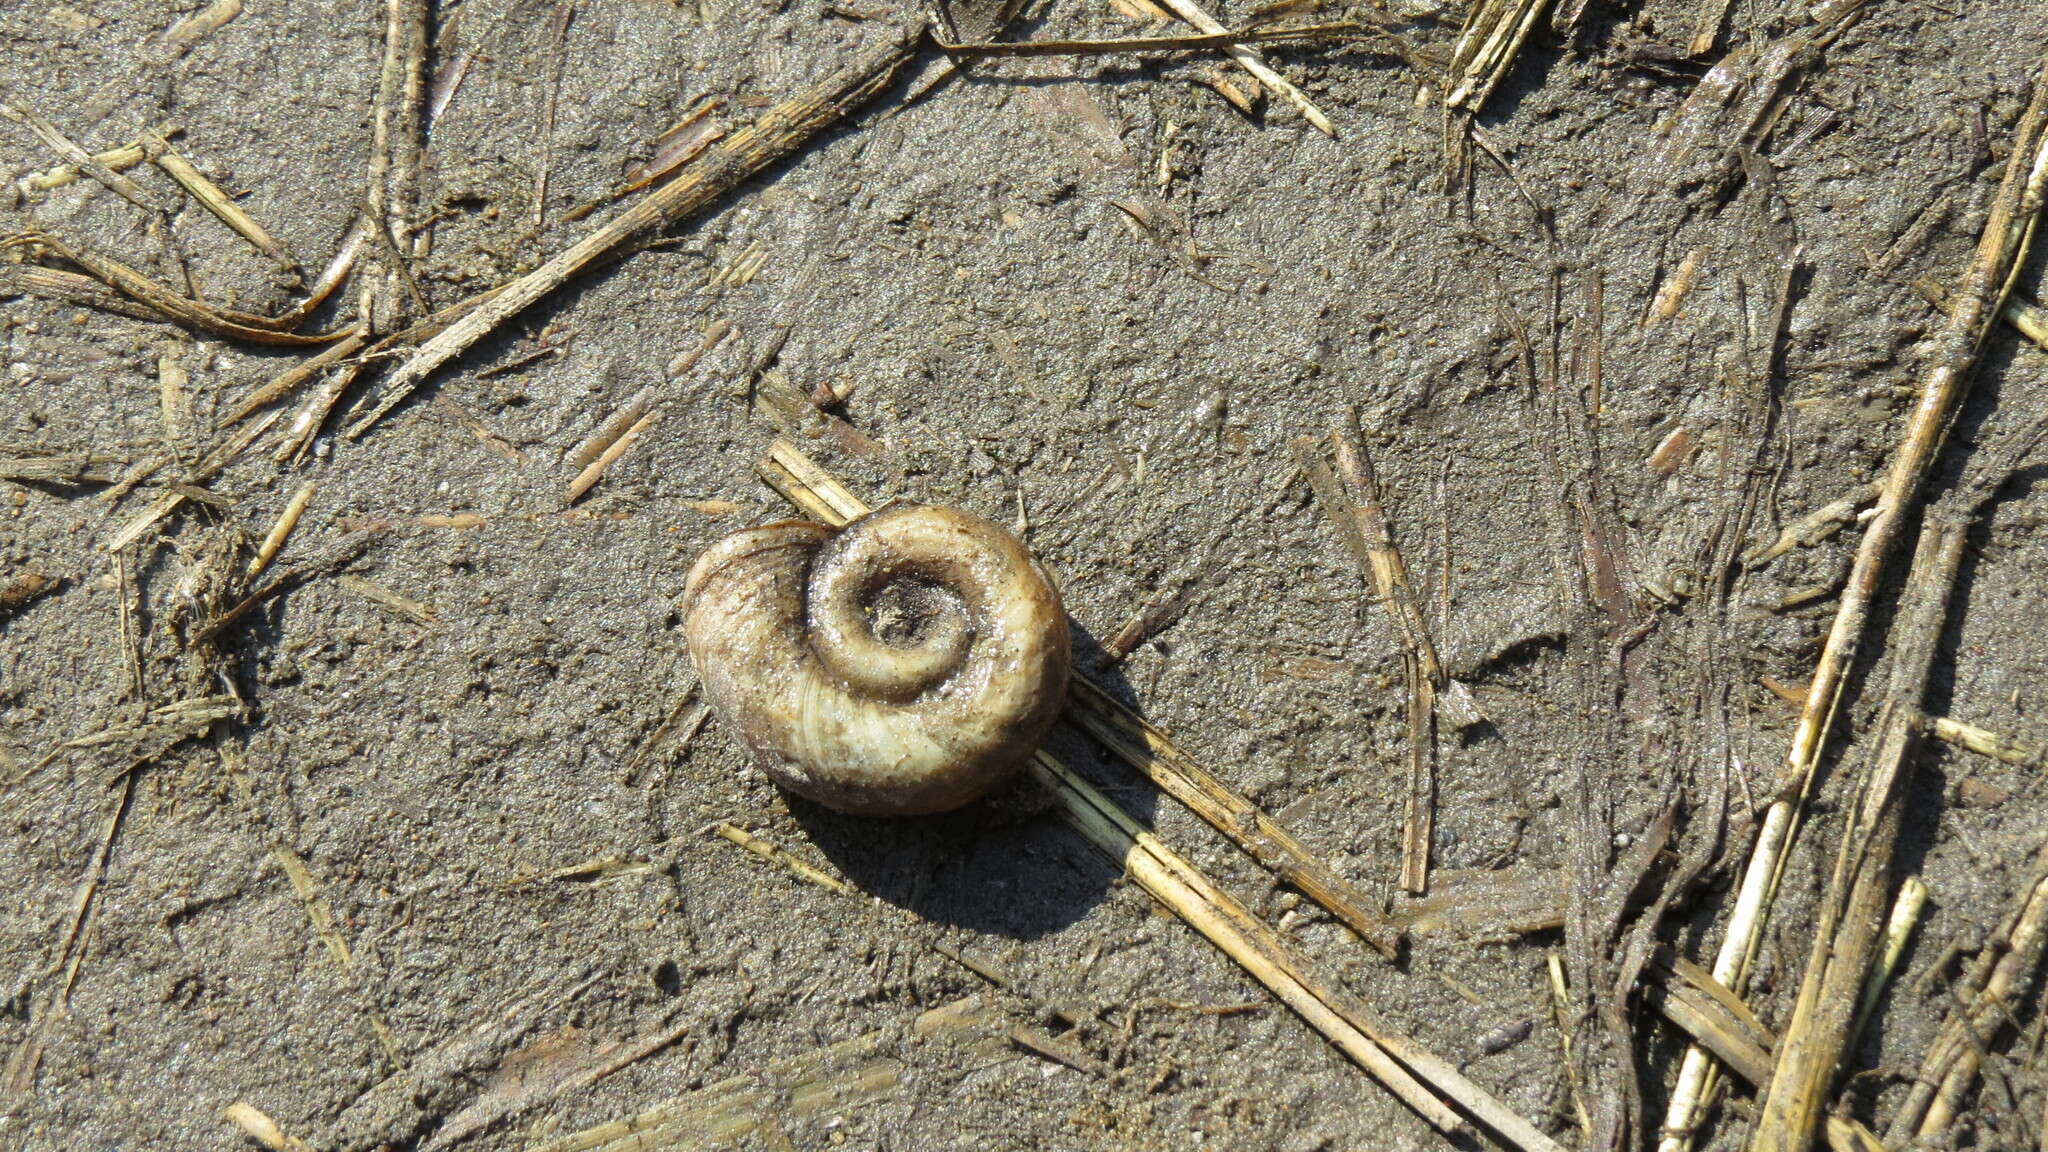 Image of Great Ram's Horn Snail